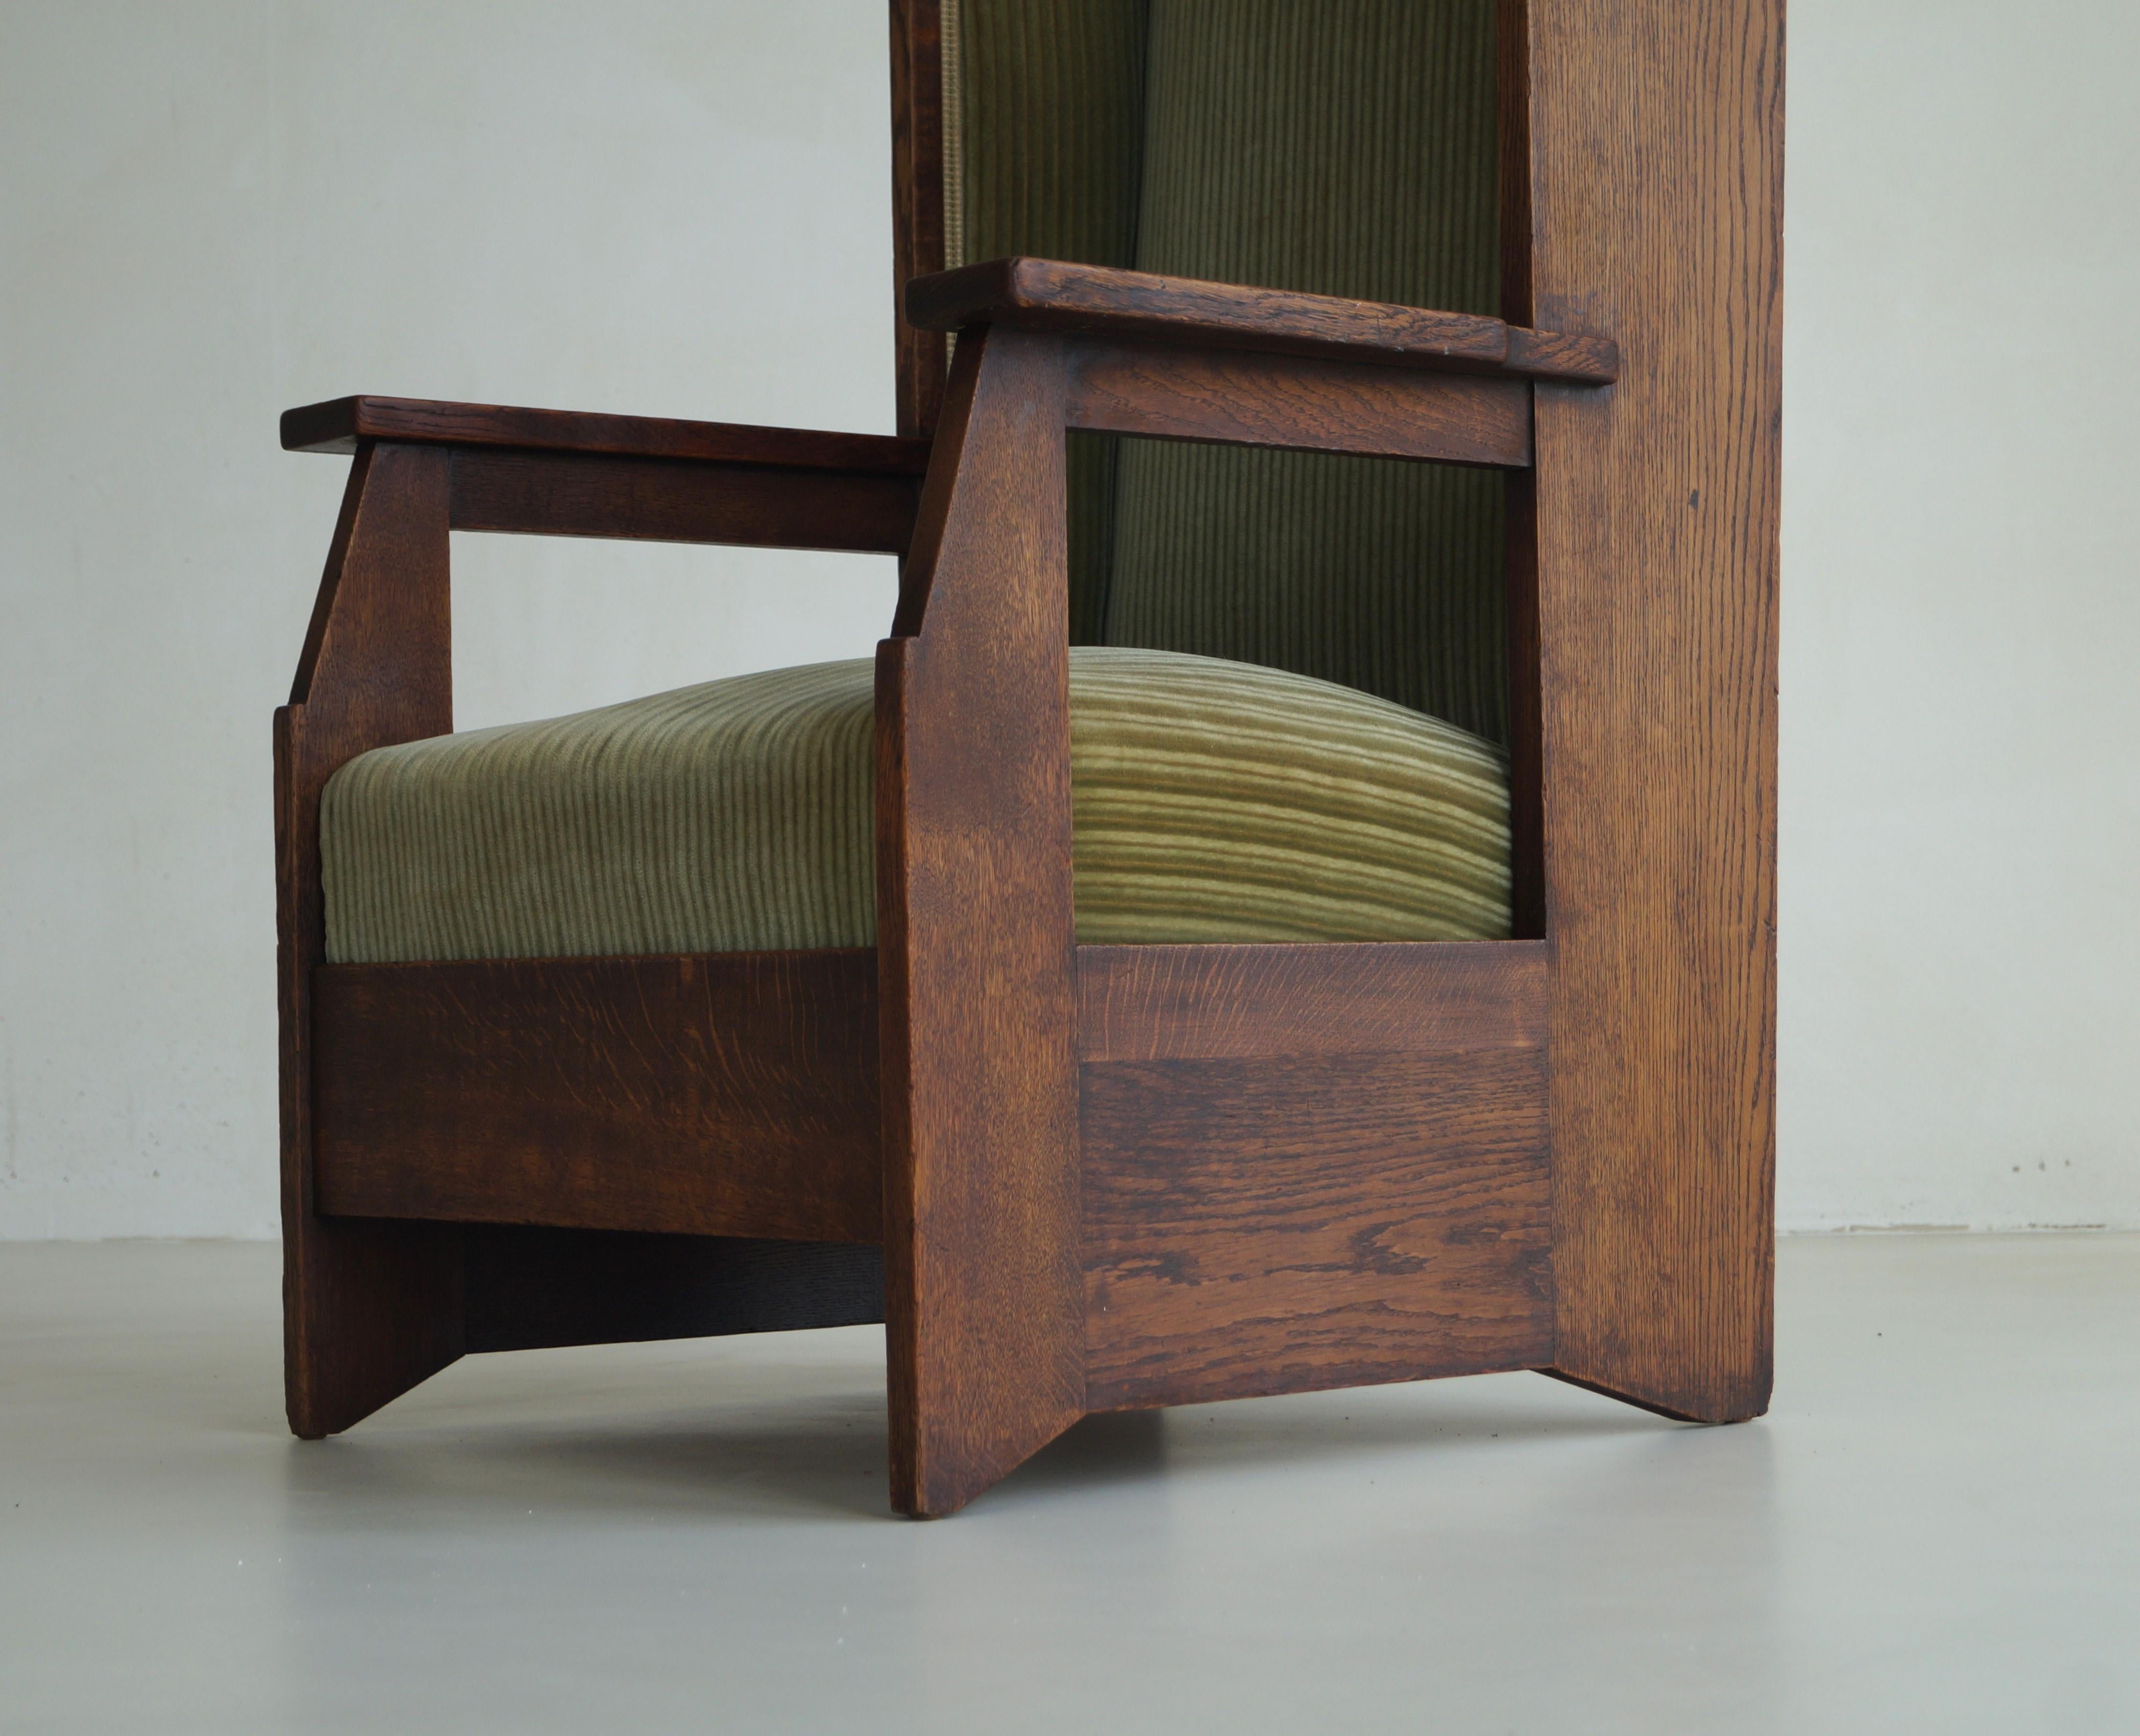 Fabric Dutch Art Deco Haagse School high back chair by Hendrik Wouda for Pander, 1924 For Sale